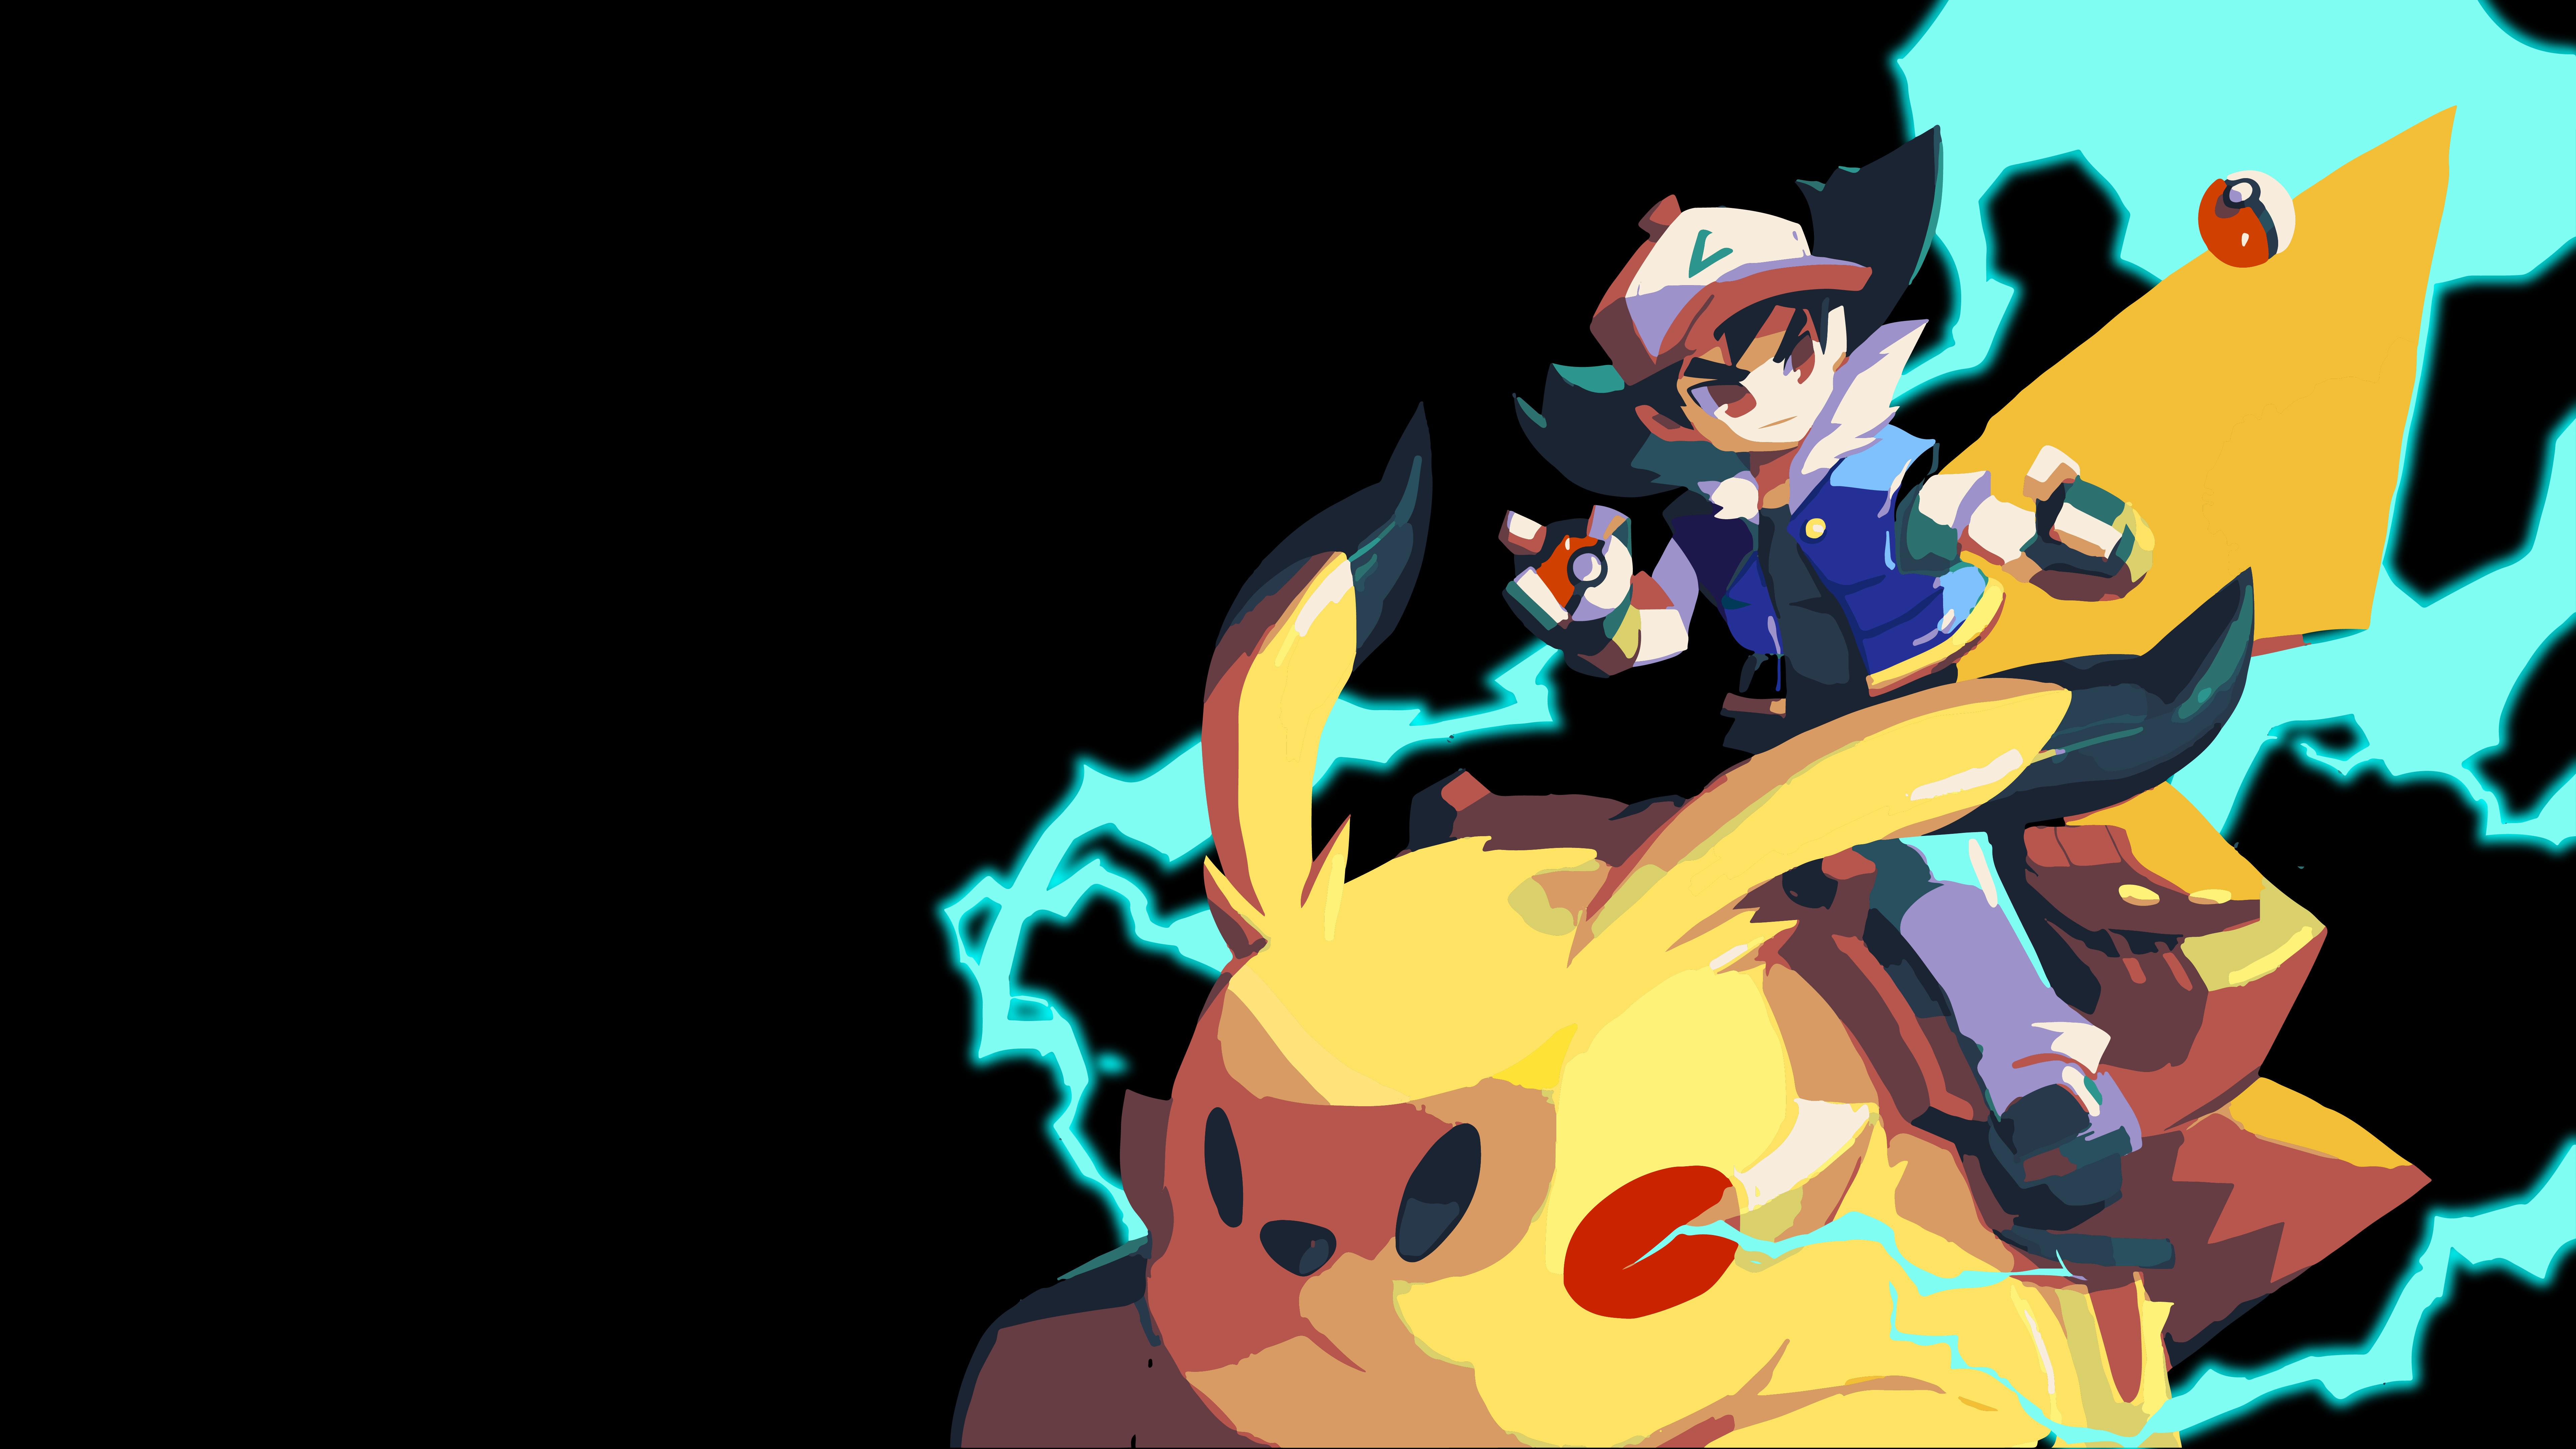 7680 x 4320 · jpeg - Riding Pokemon 8k, HD Anime, 4k Wallpapers, Images, Backgrounds, Photos ...